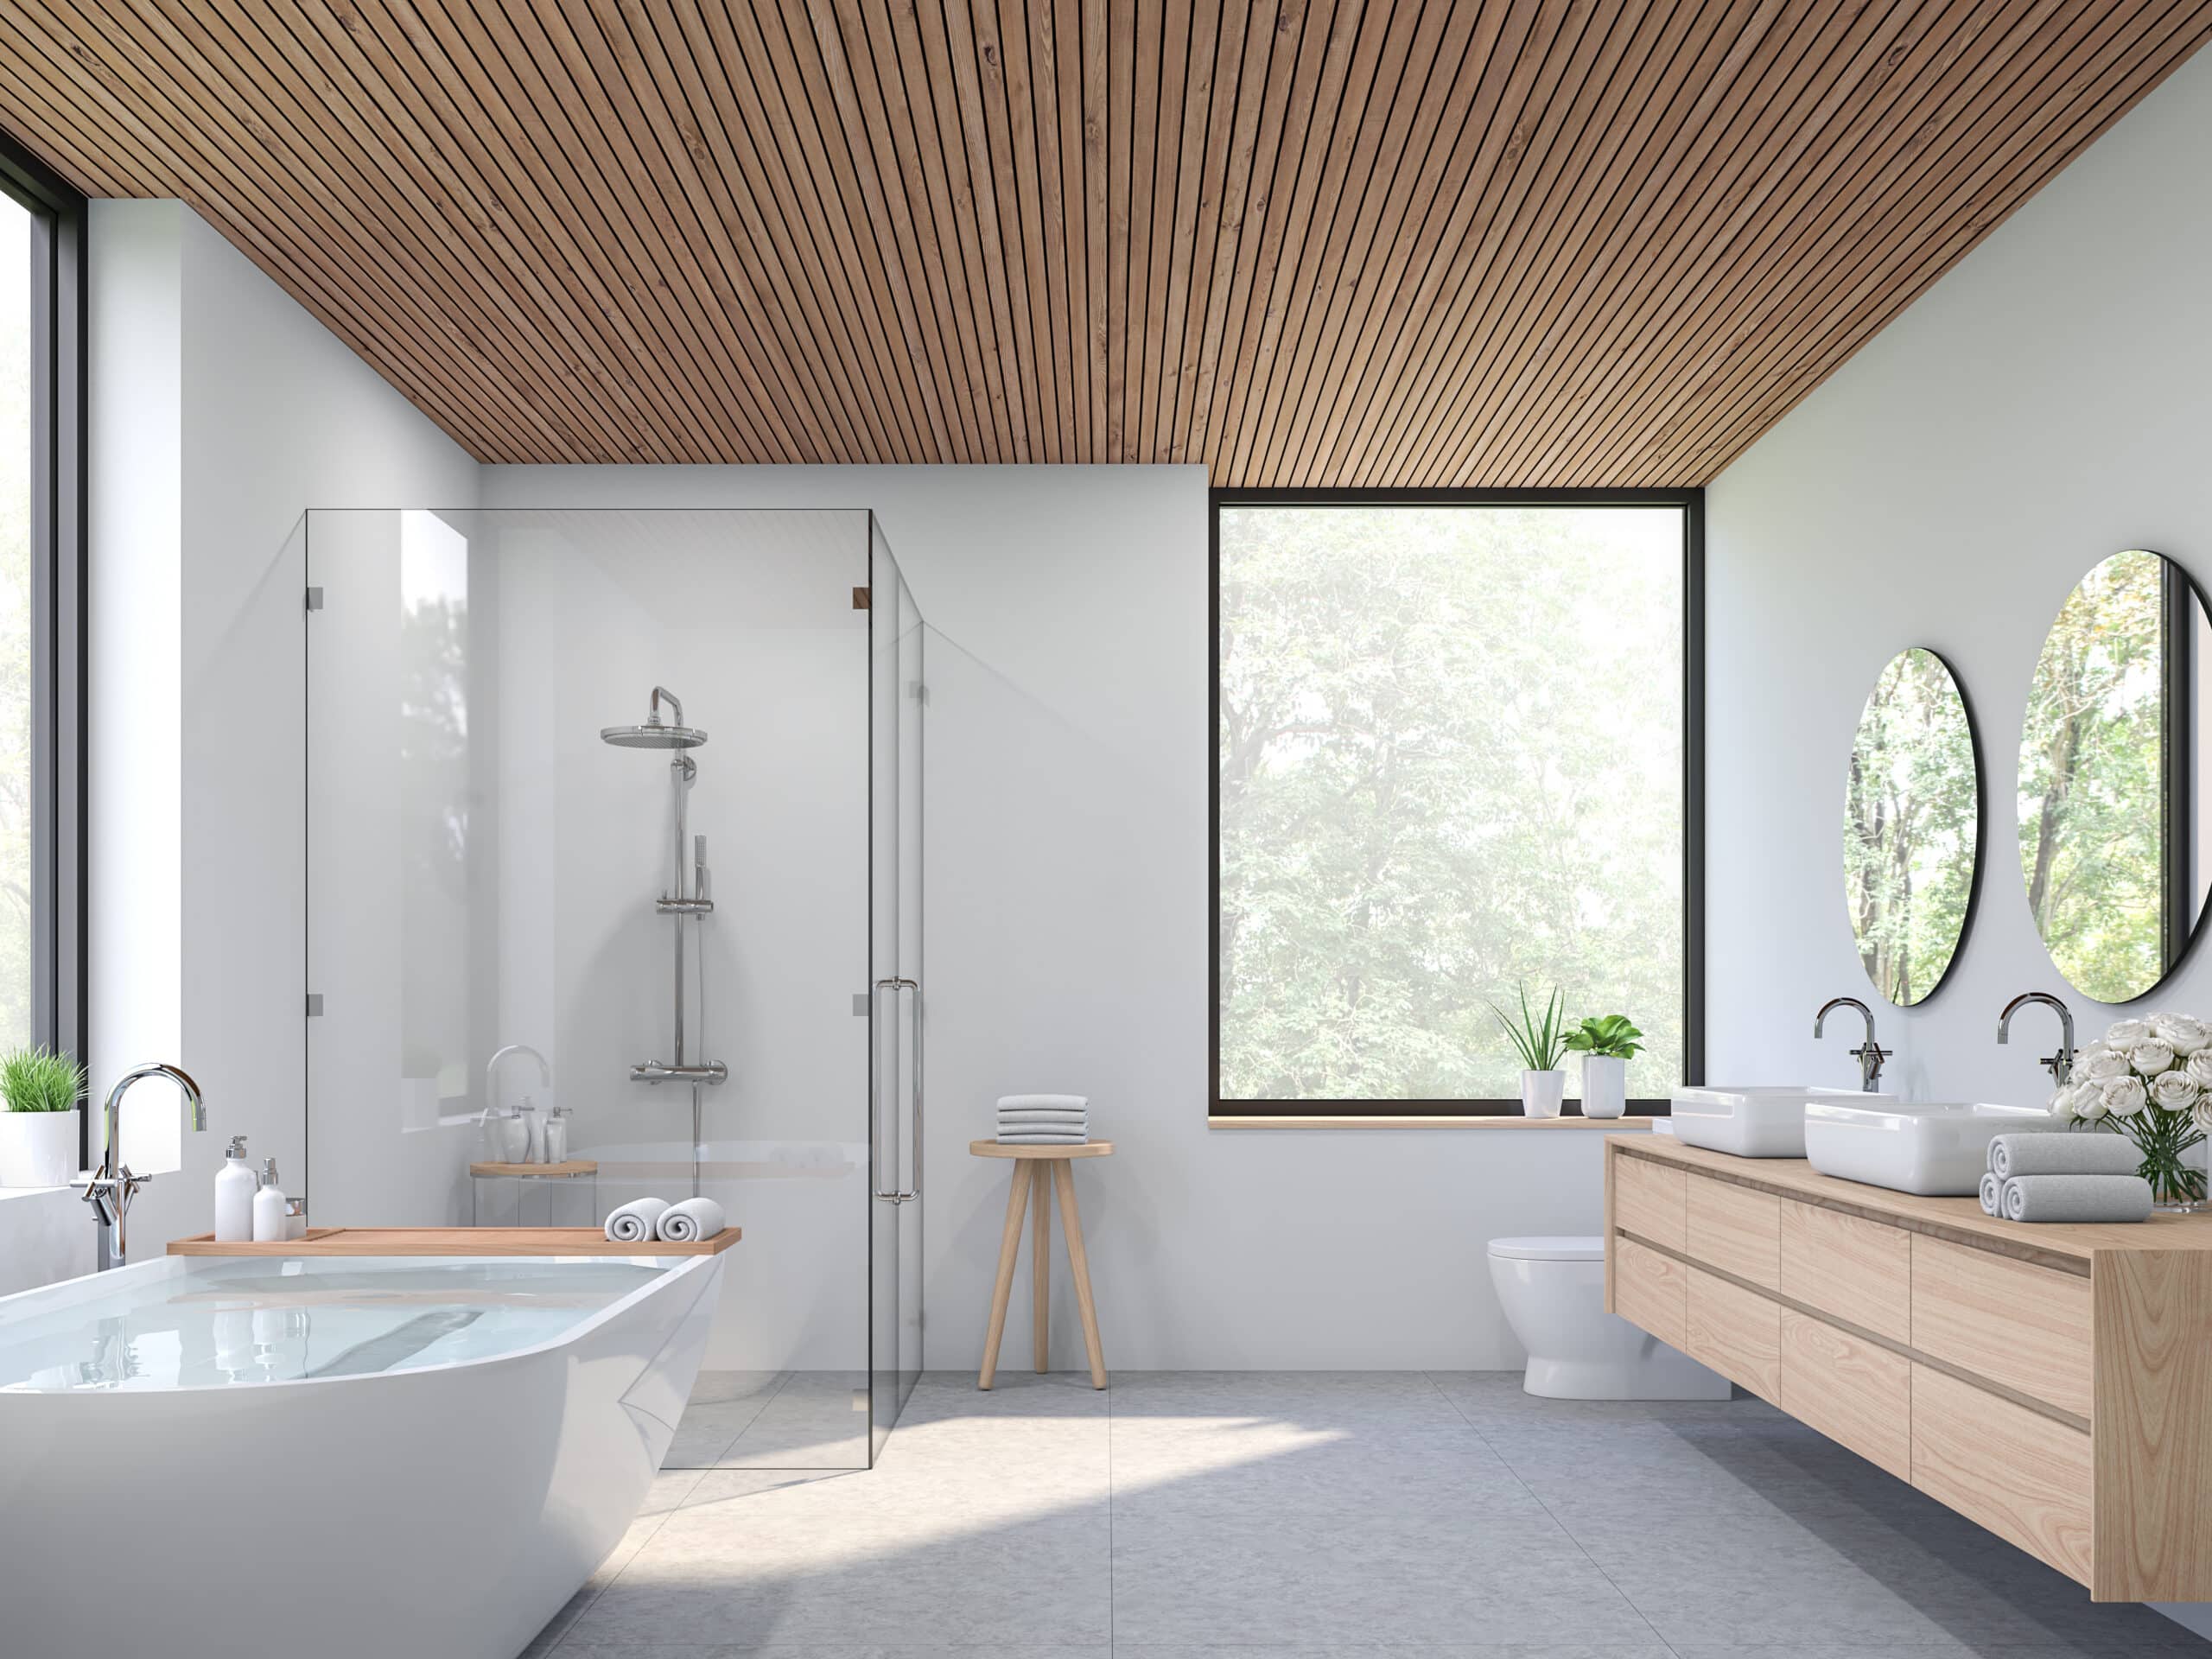 Modern contemporary loft bathroom. There are concrete tile floor, white wall and wood plank ceiling ,There are large windows look out to see the nature view.